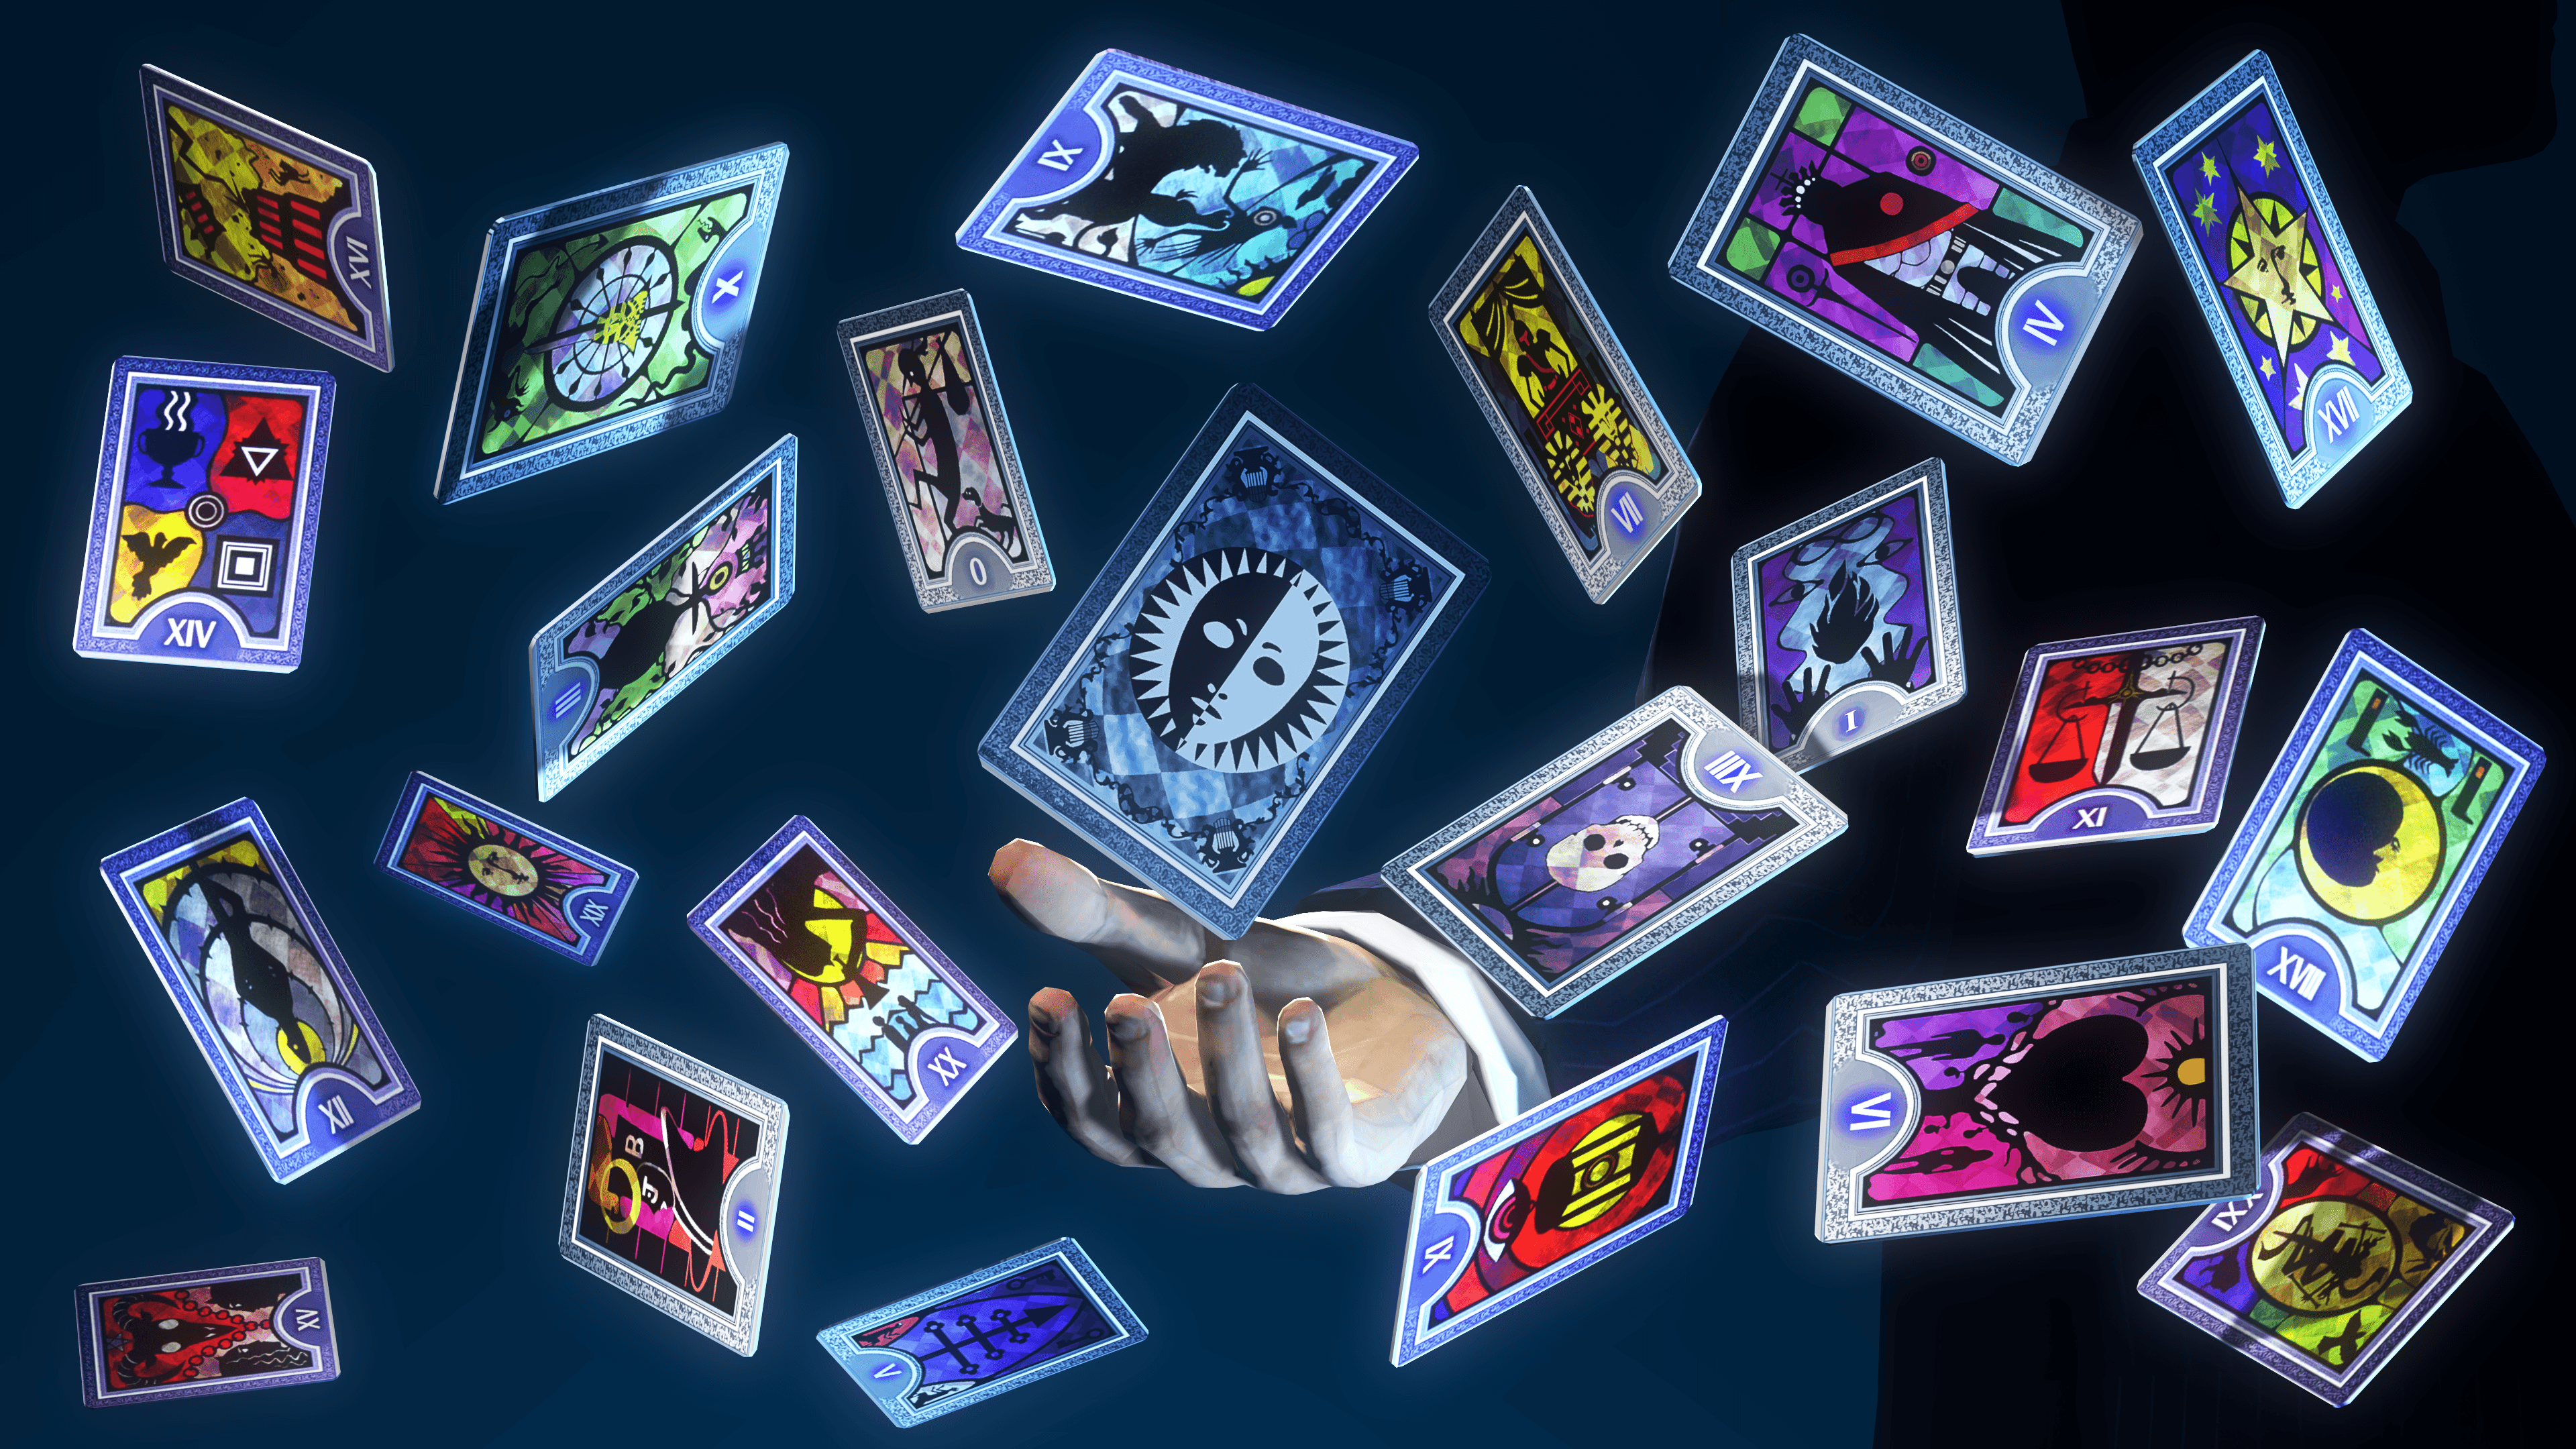 Tarot Cards From Persona